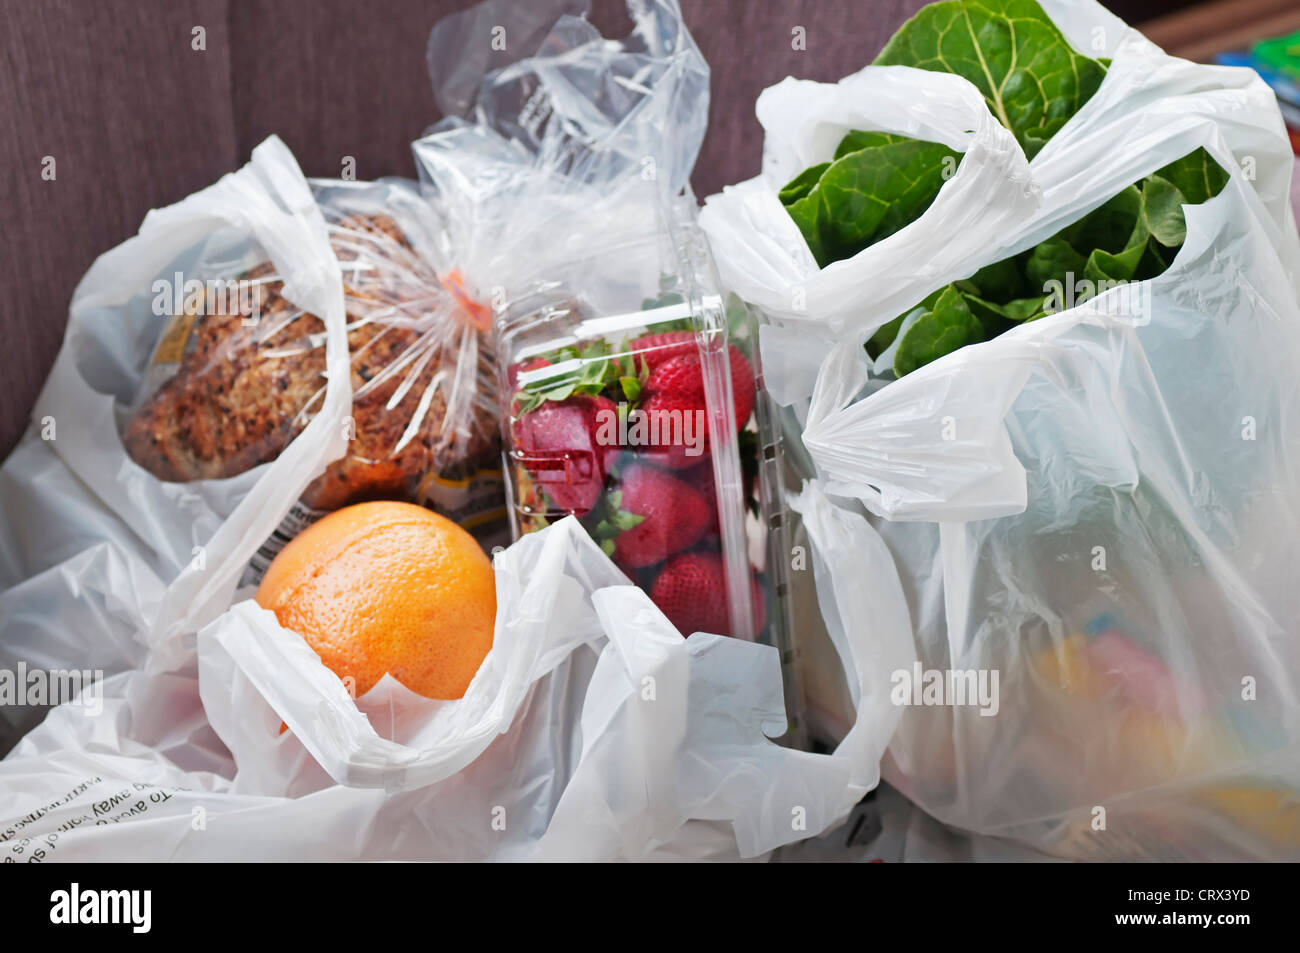 Plastic shopping bags are filled with grocery store purchases. Stock Photo